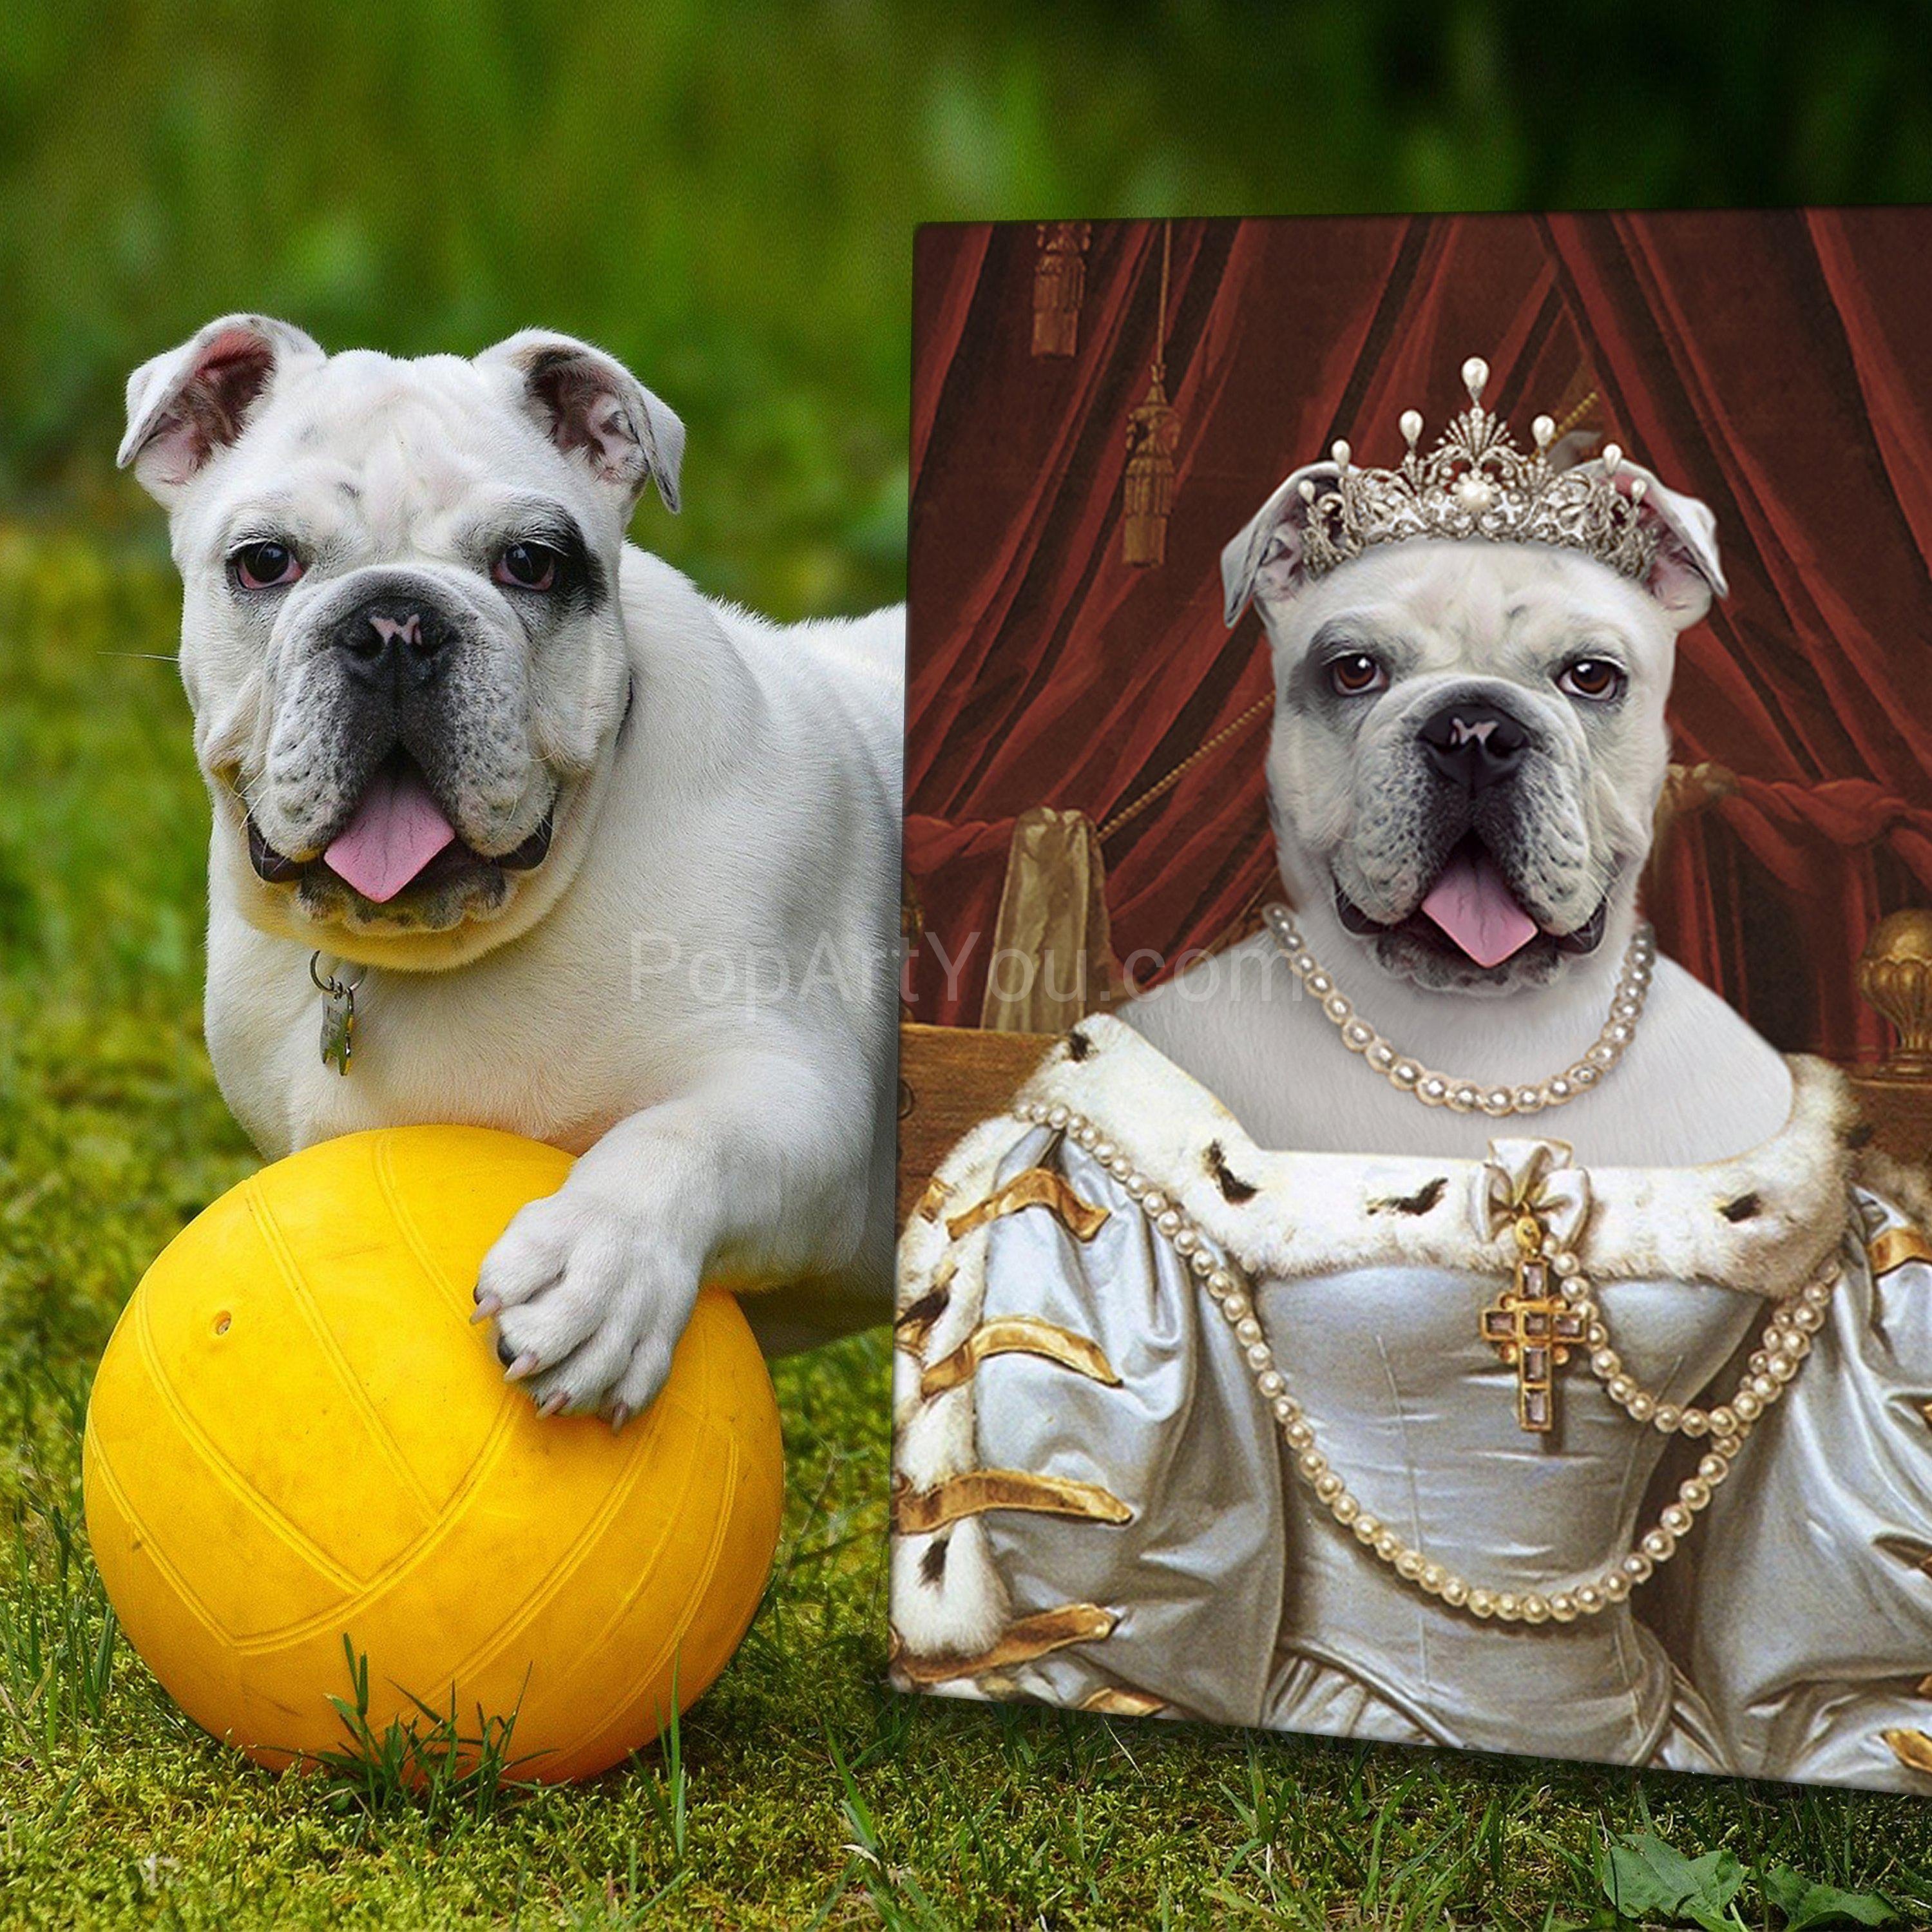 A female dog with a yellow ball stands near a portrait of himself with a human body wearing a white royal dress with a crown